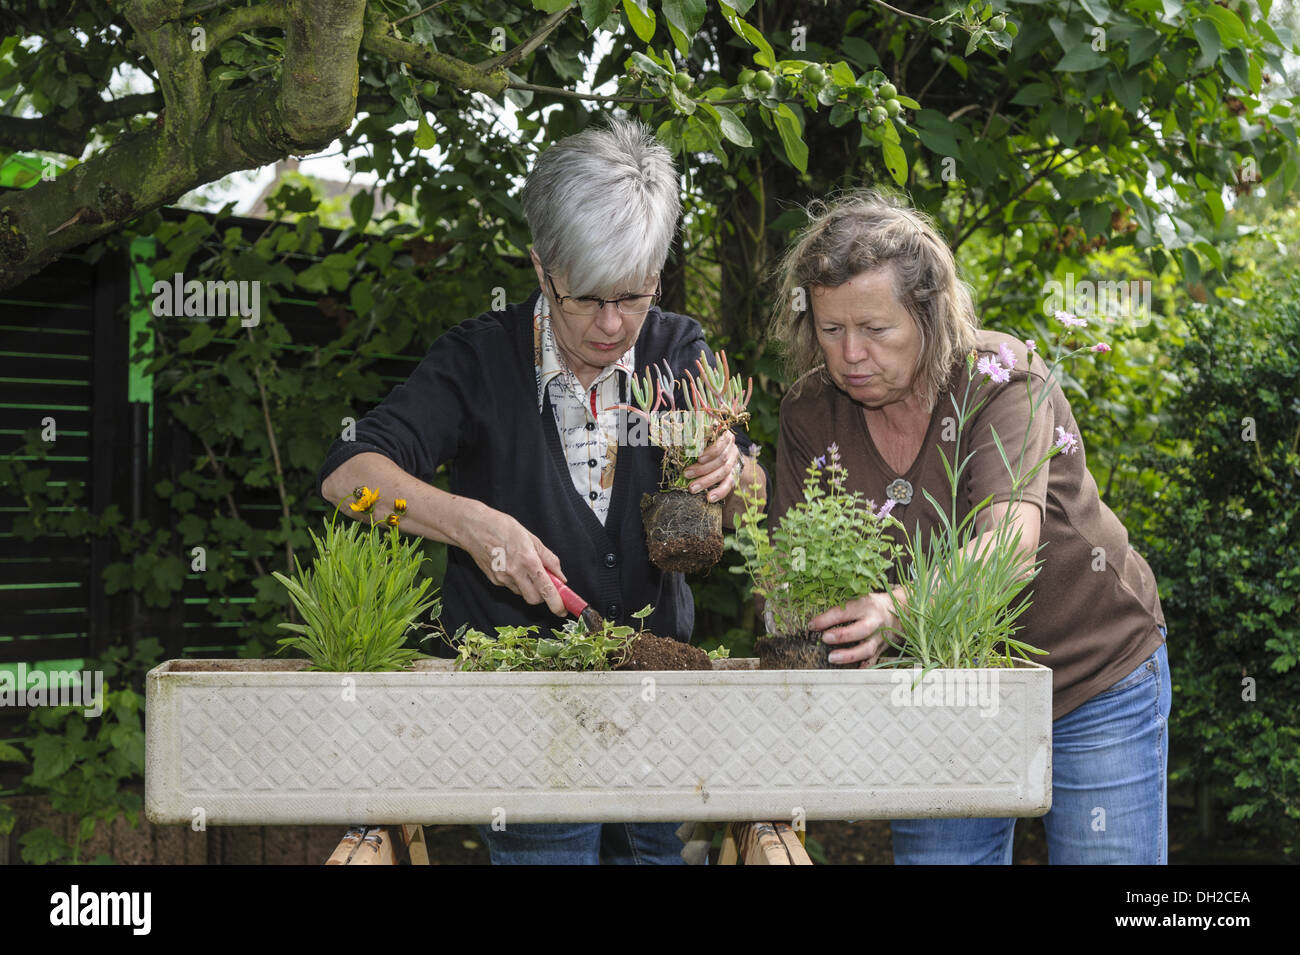 Gardeners in planting a flower box Stock Photo